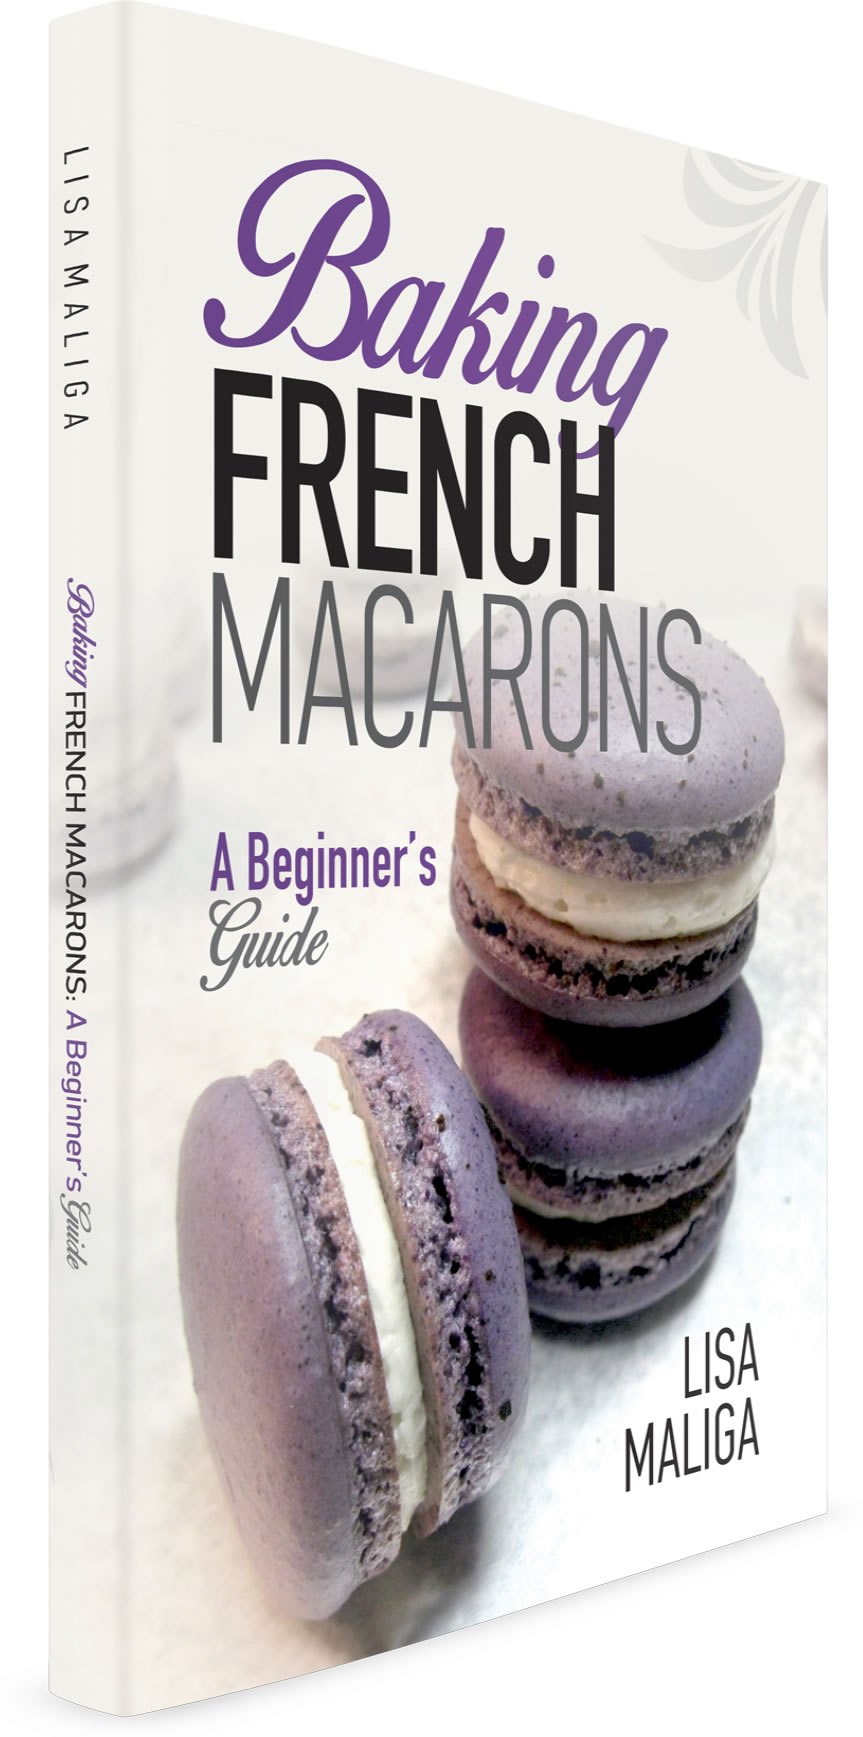 baking french macarons a beginner's guide by lisa maliga